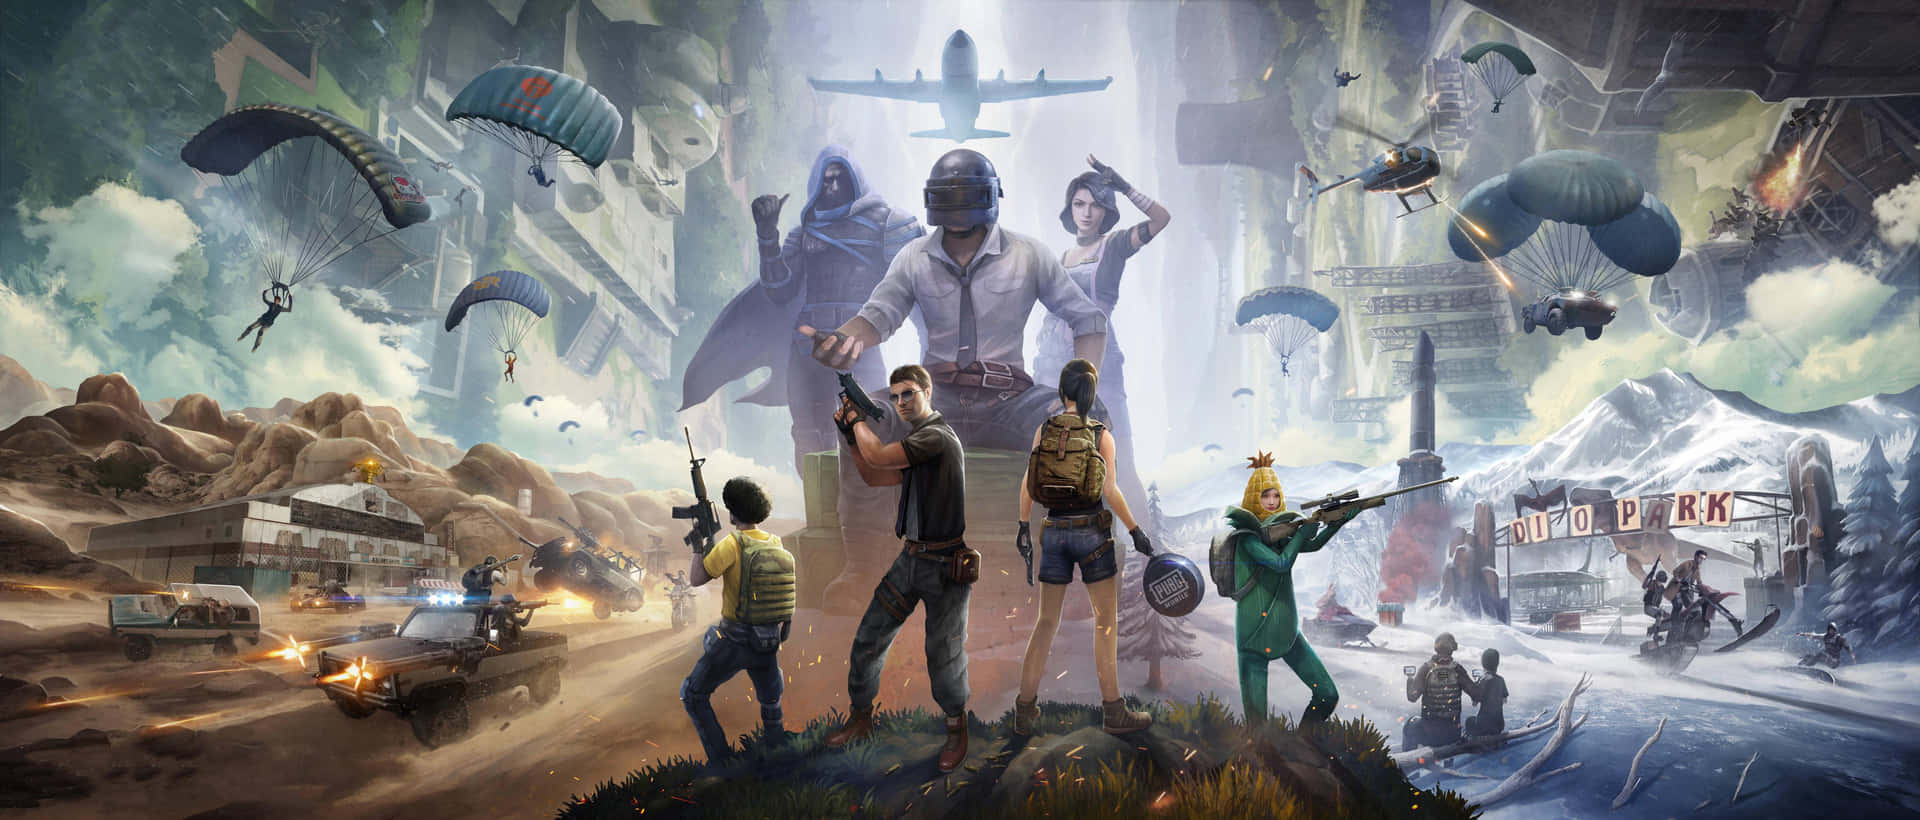 A Poster For A Game With People In The Background